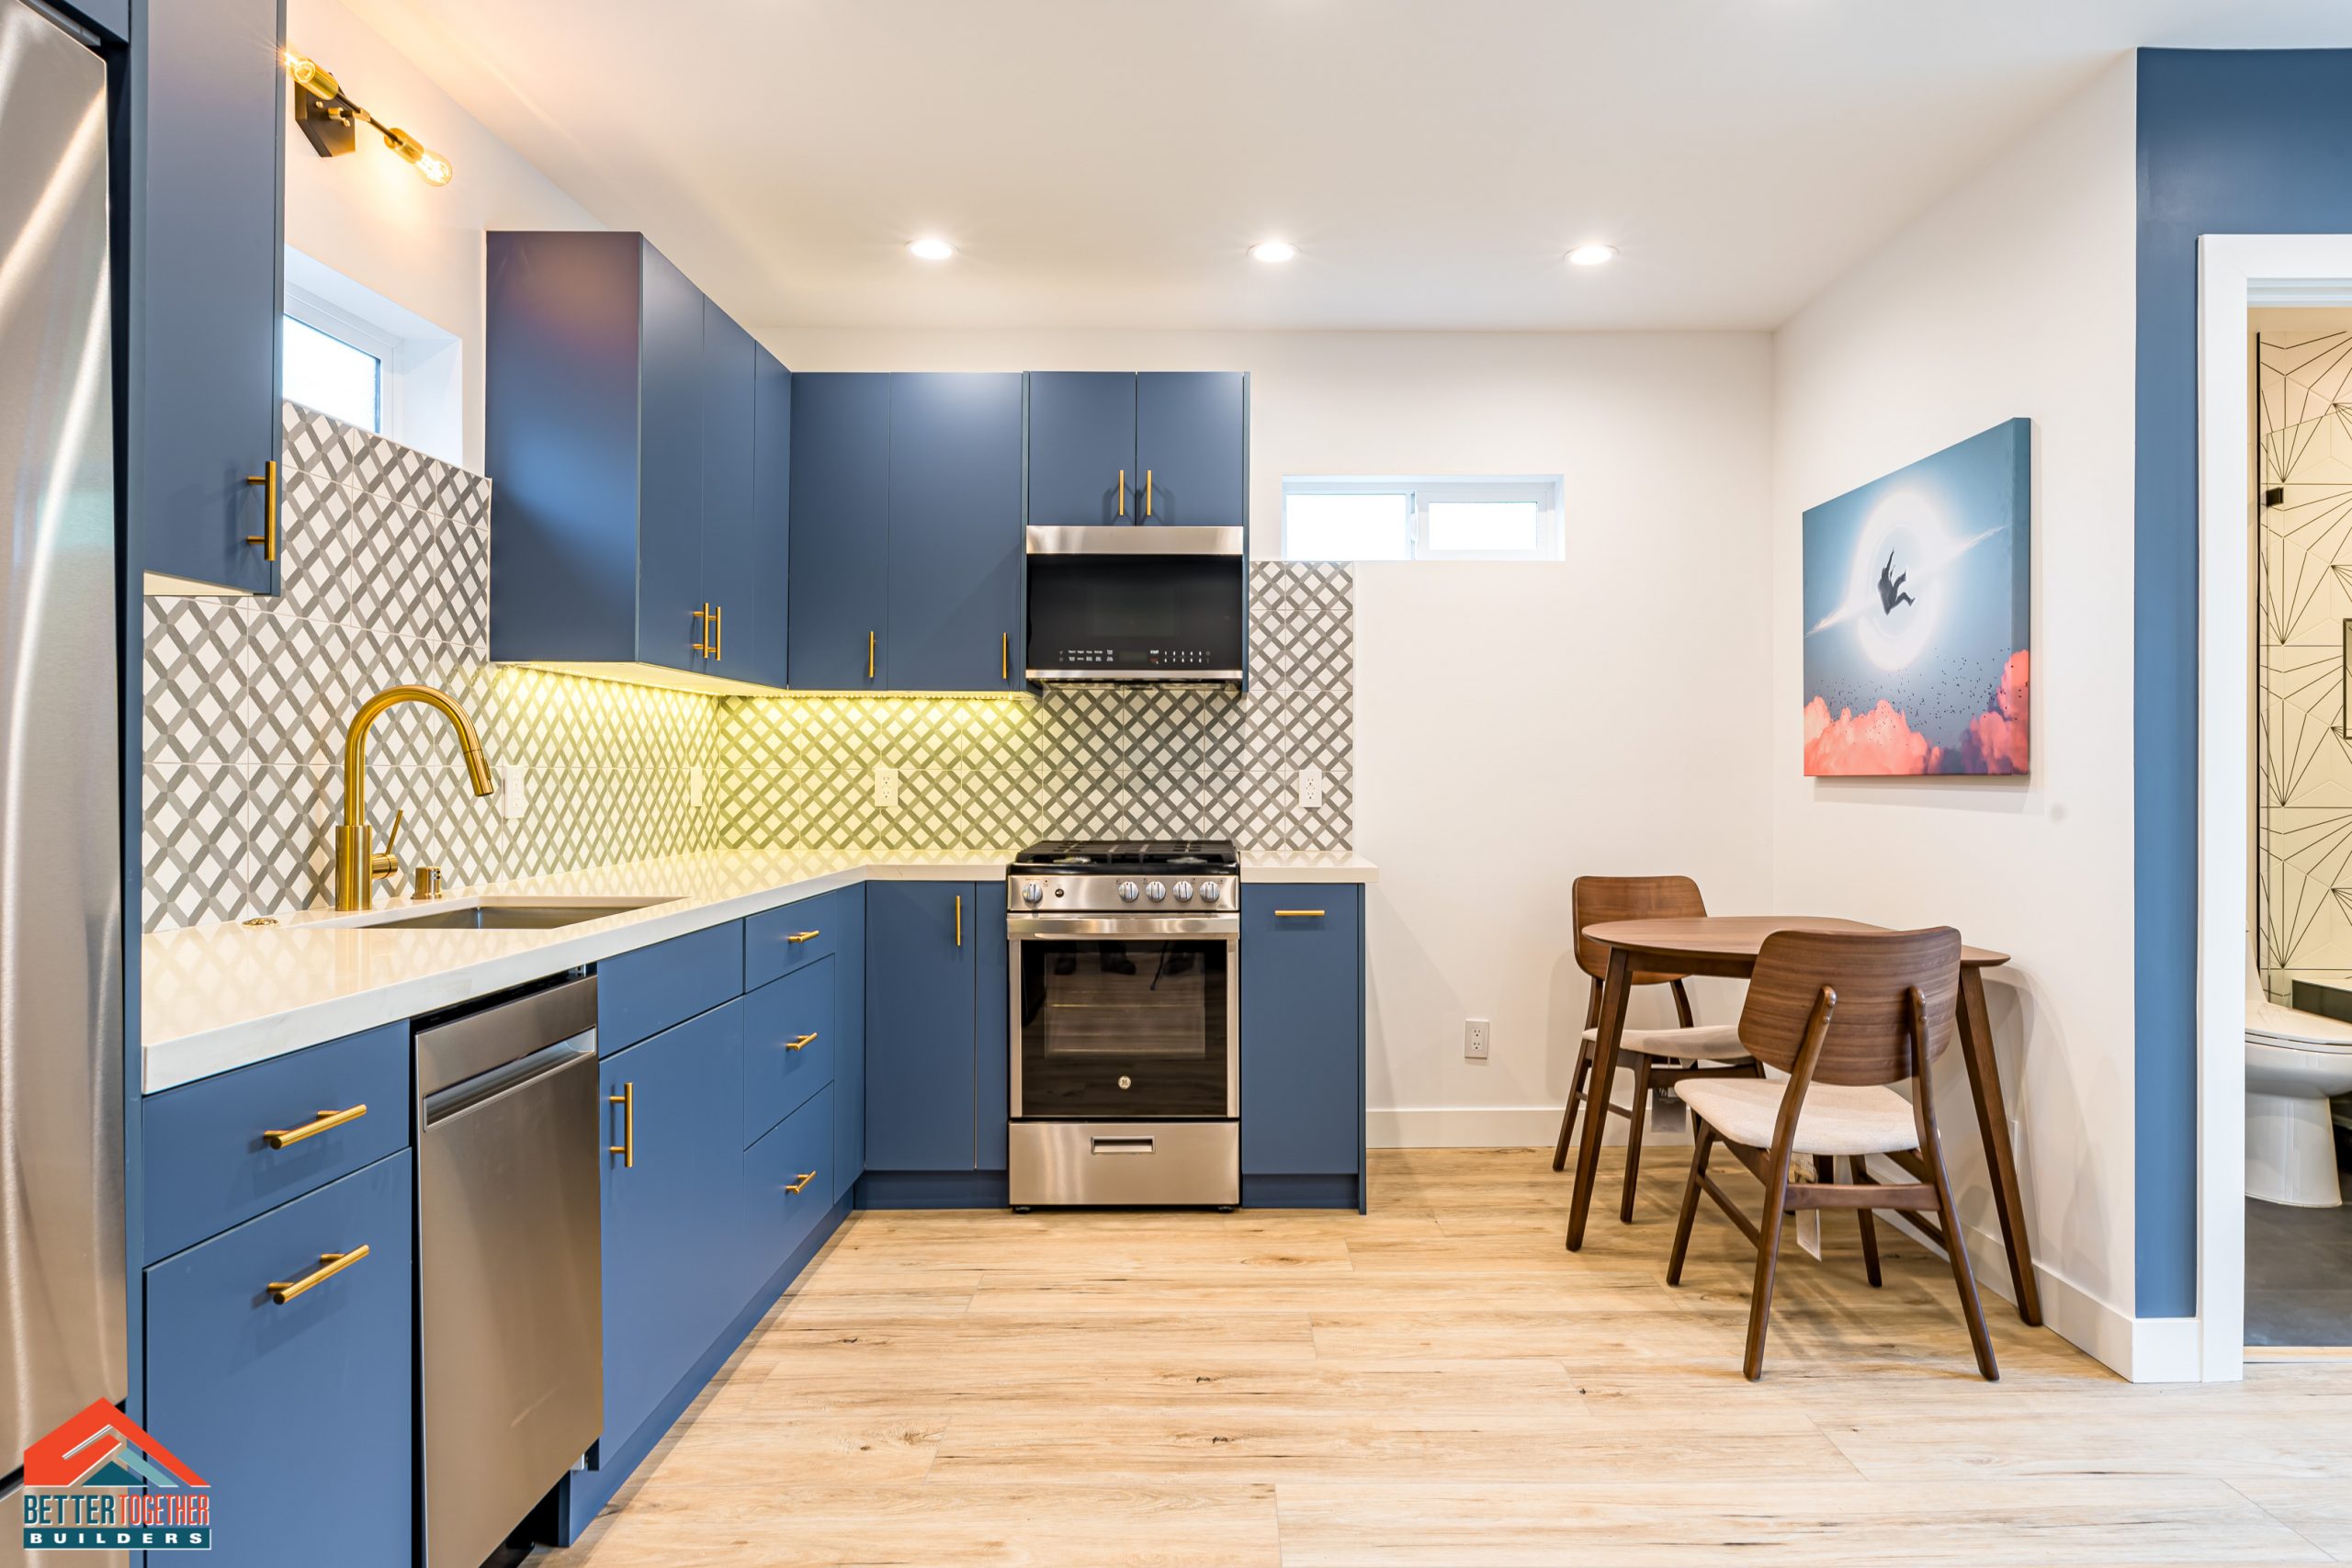 Better_Together_Builders_Accessory_Dwelling_Unit_Lake_Balboa_0216_0005